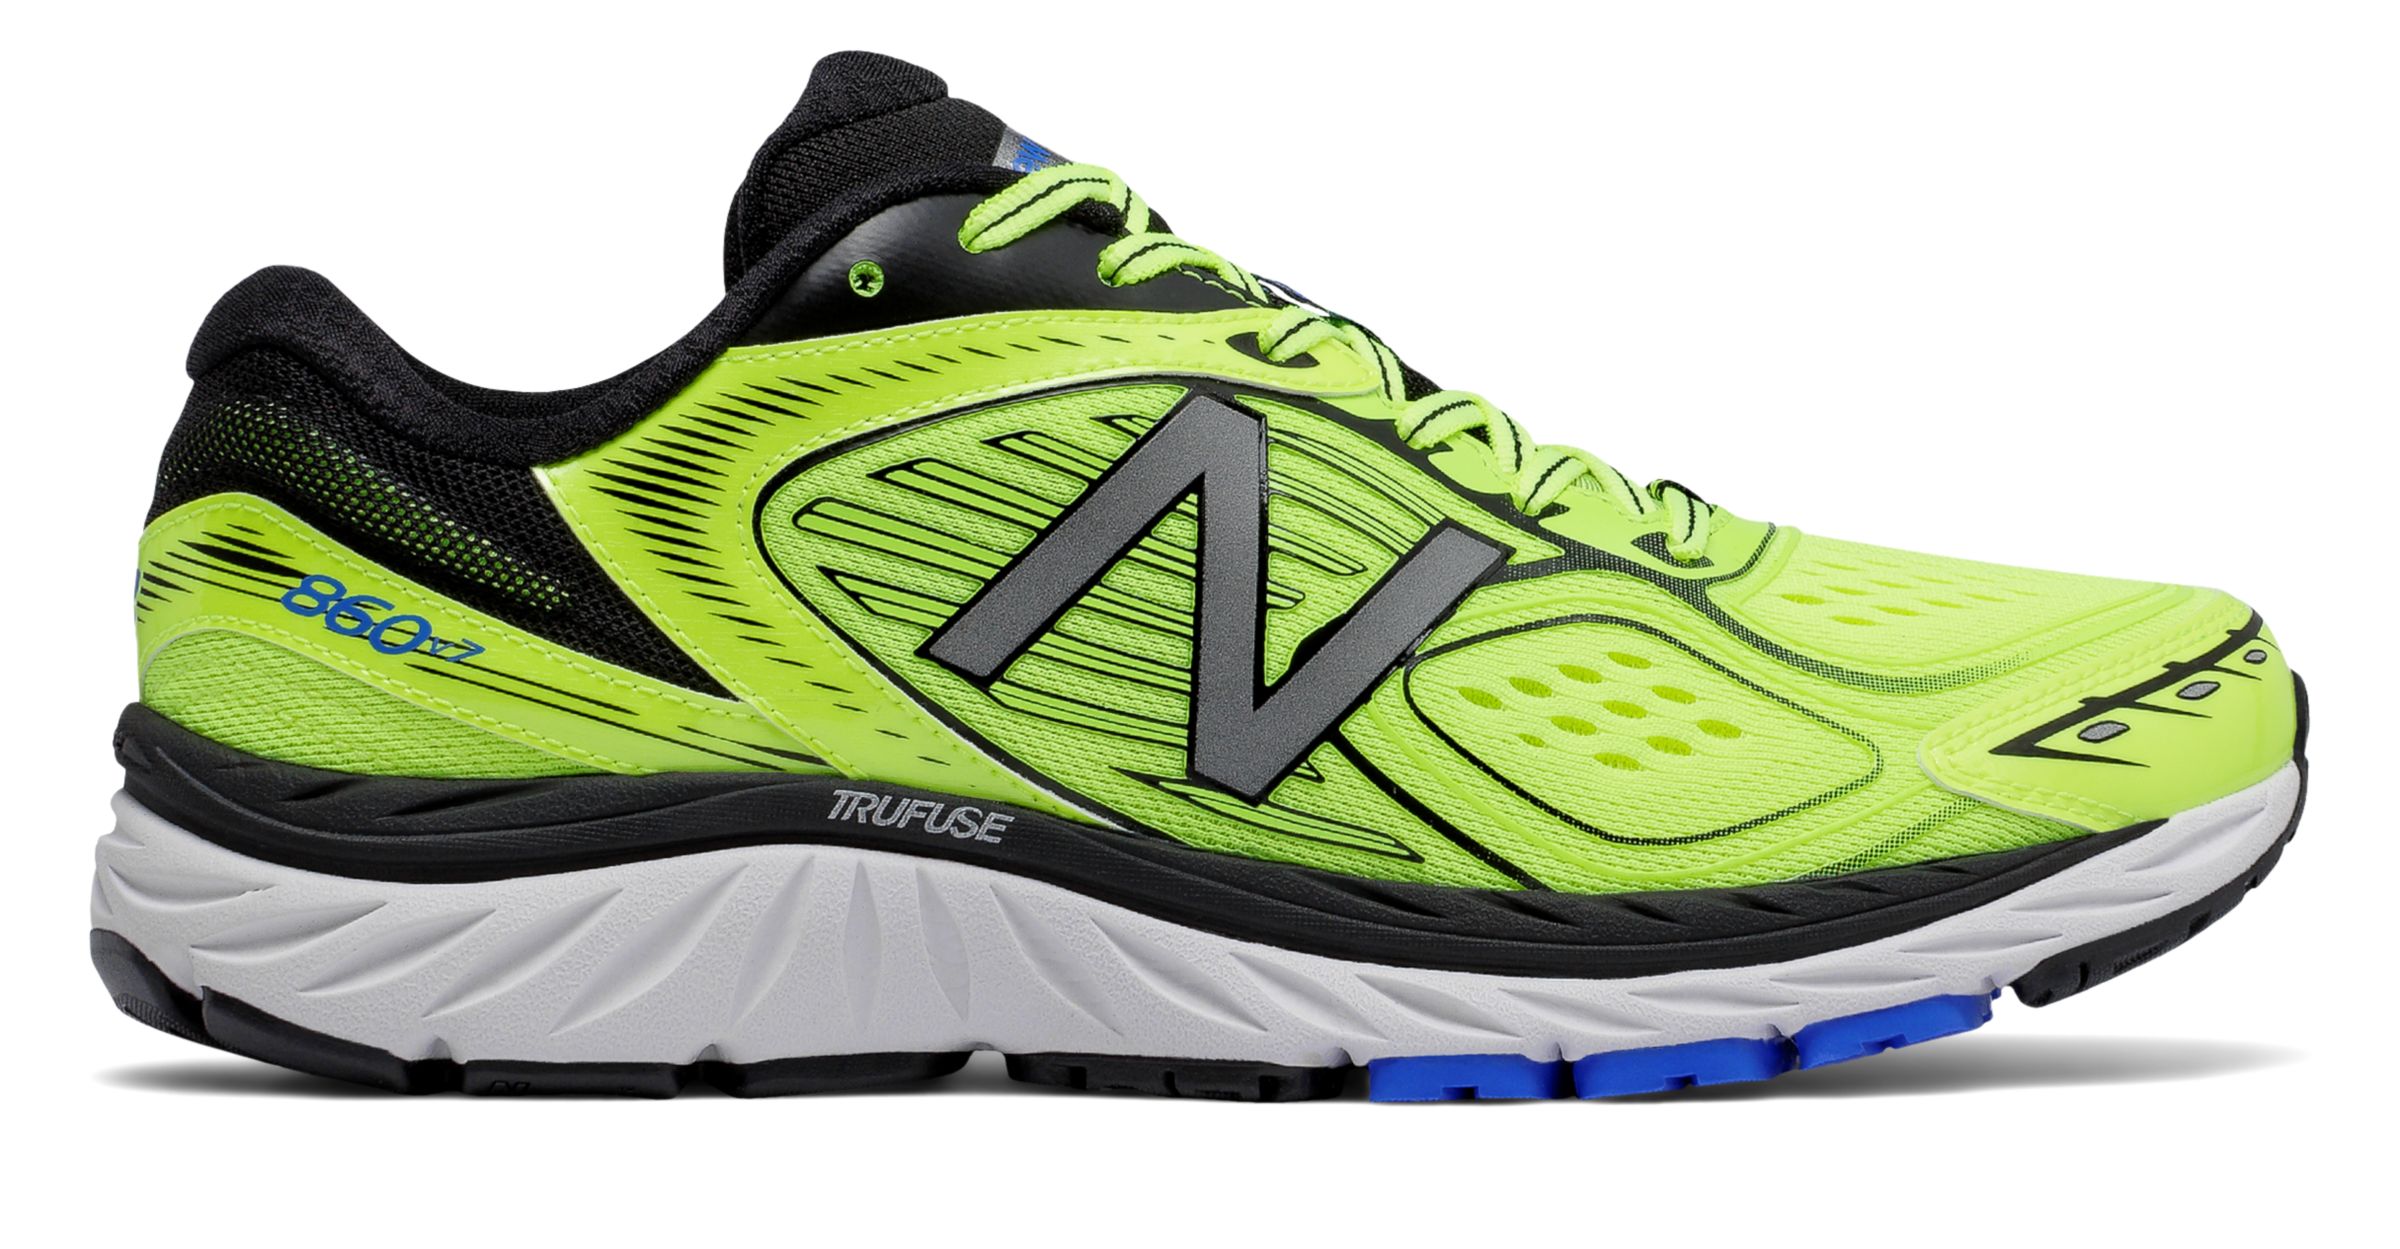 New Balance M860-V7 on Sale - Discounts Up to 20% Off on M860YB7 at Joe's New  Balance Outlet